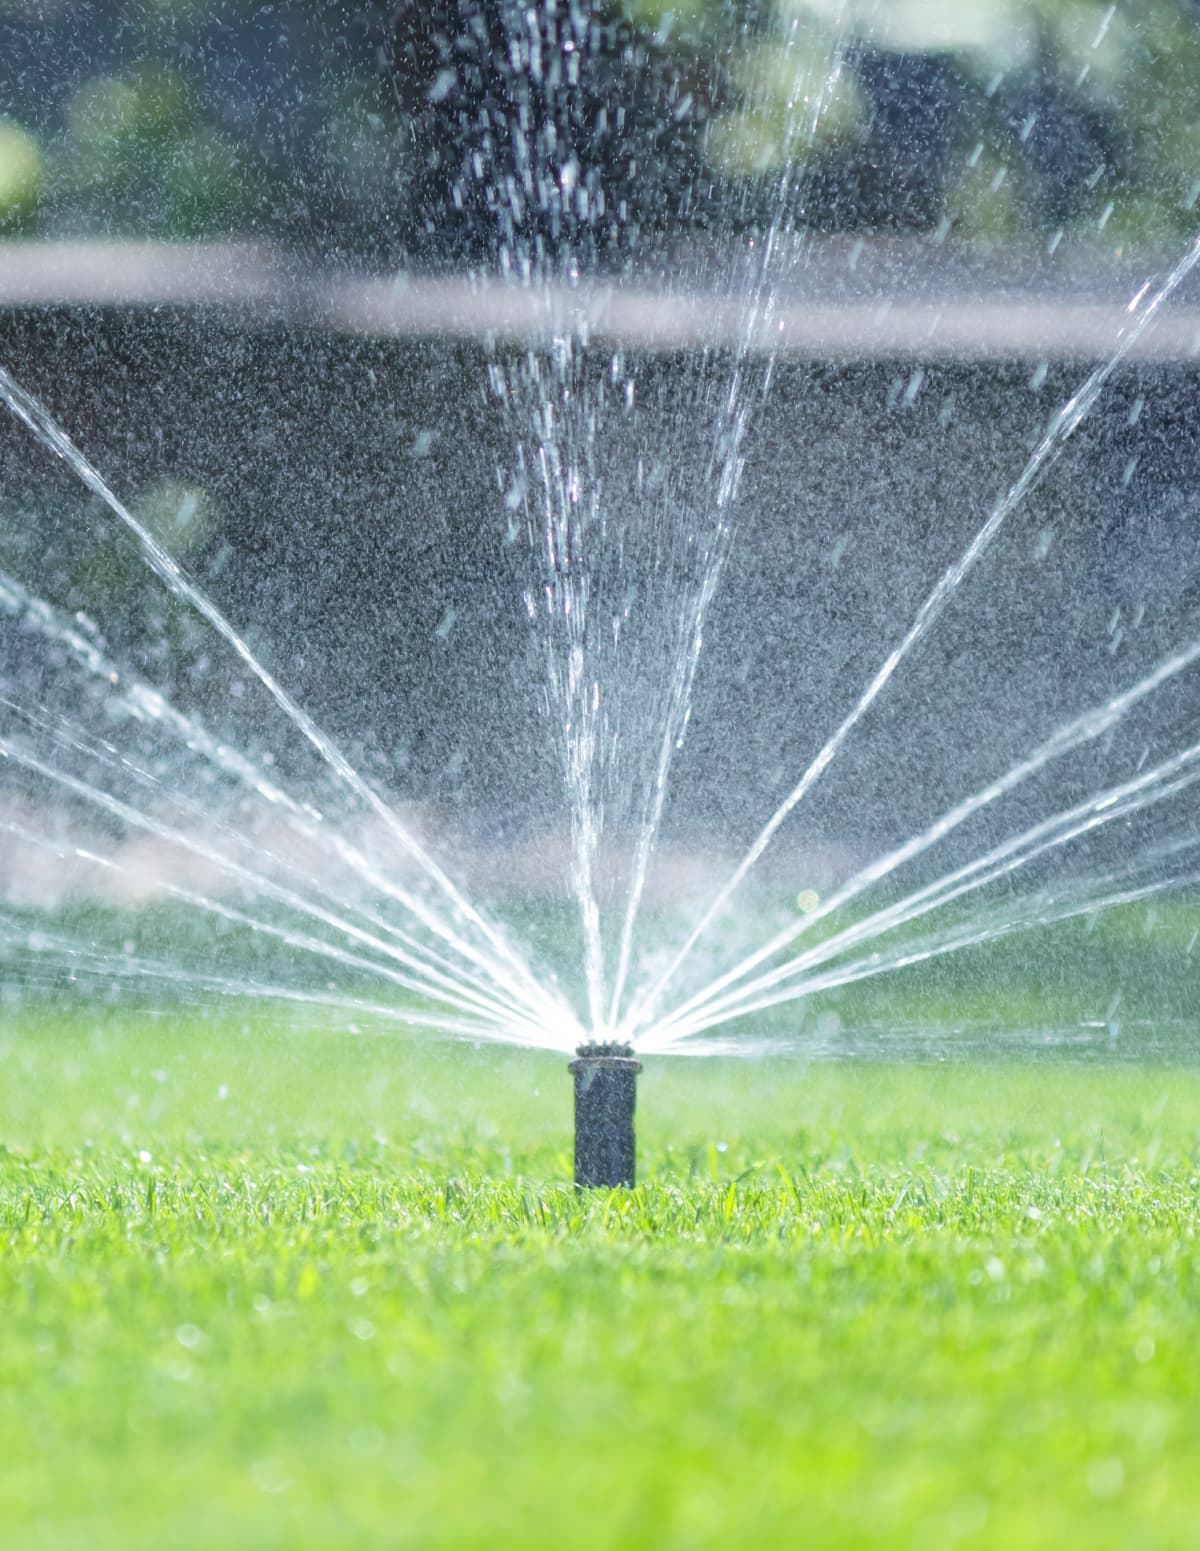 A sprinkler showering water across a lush, green lawn